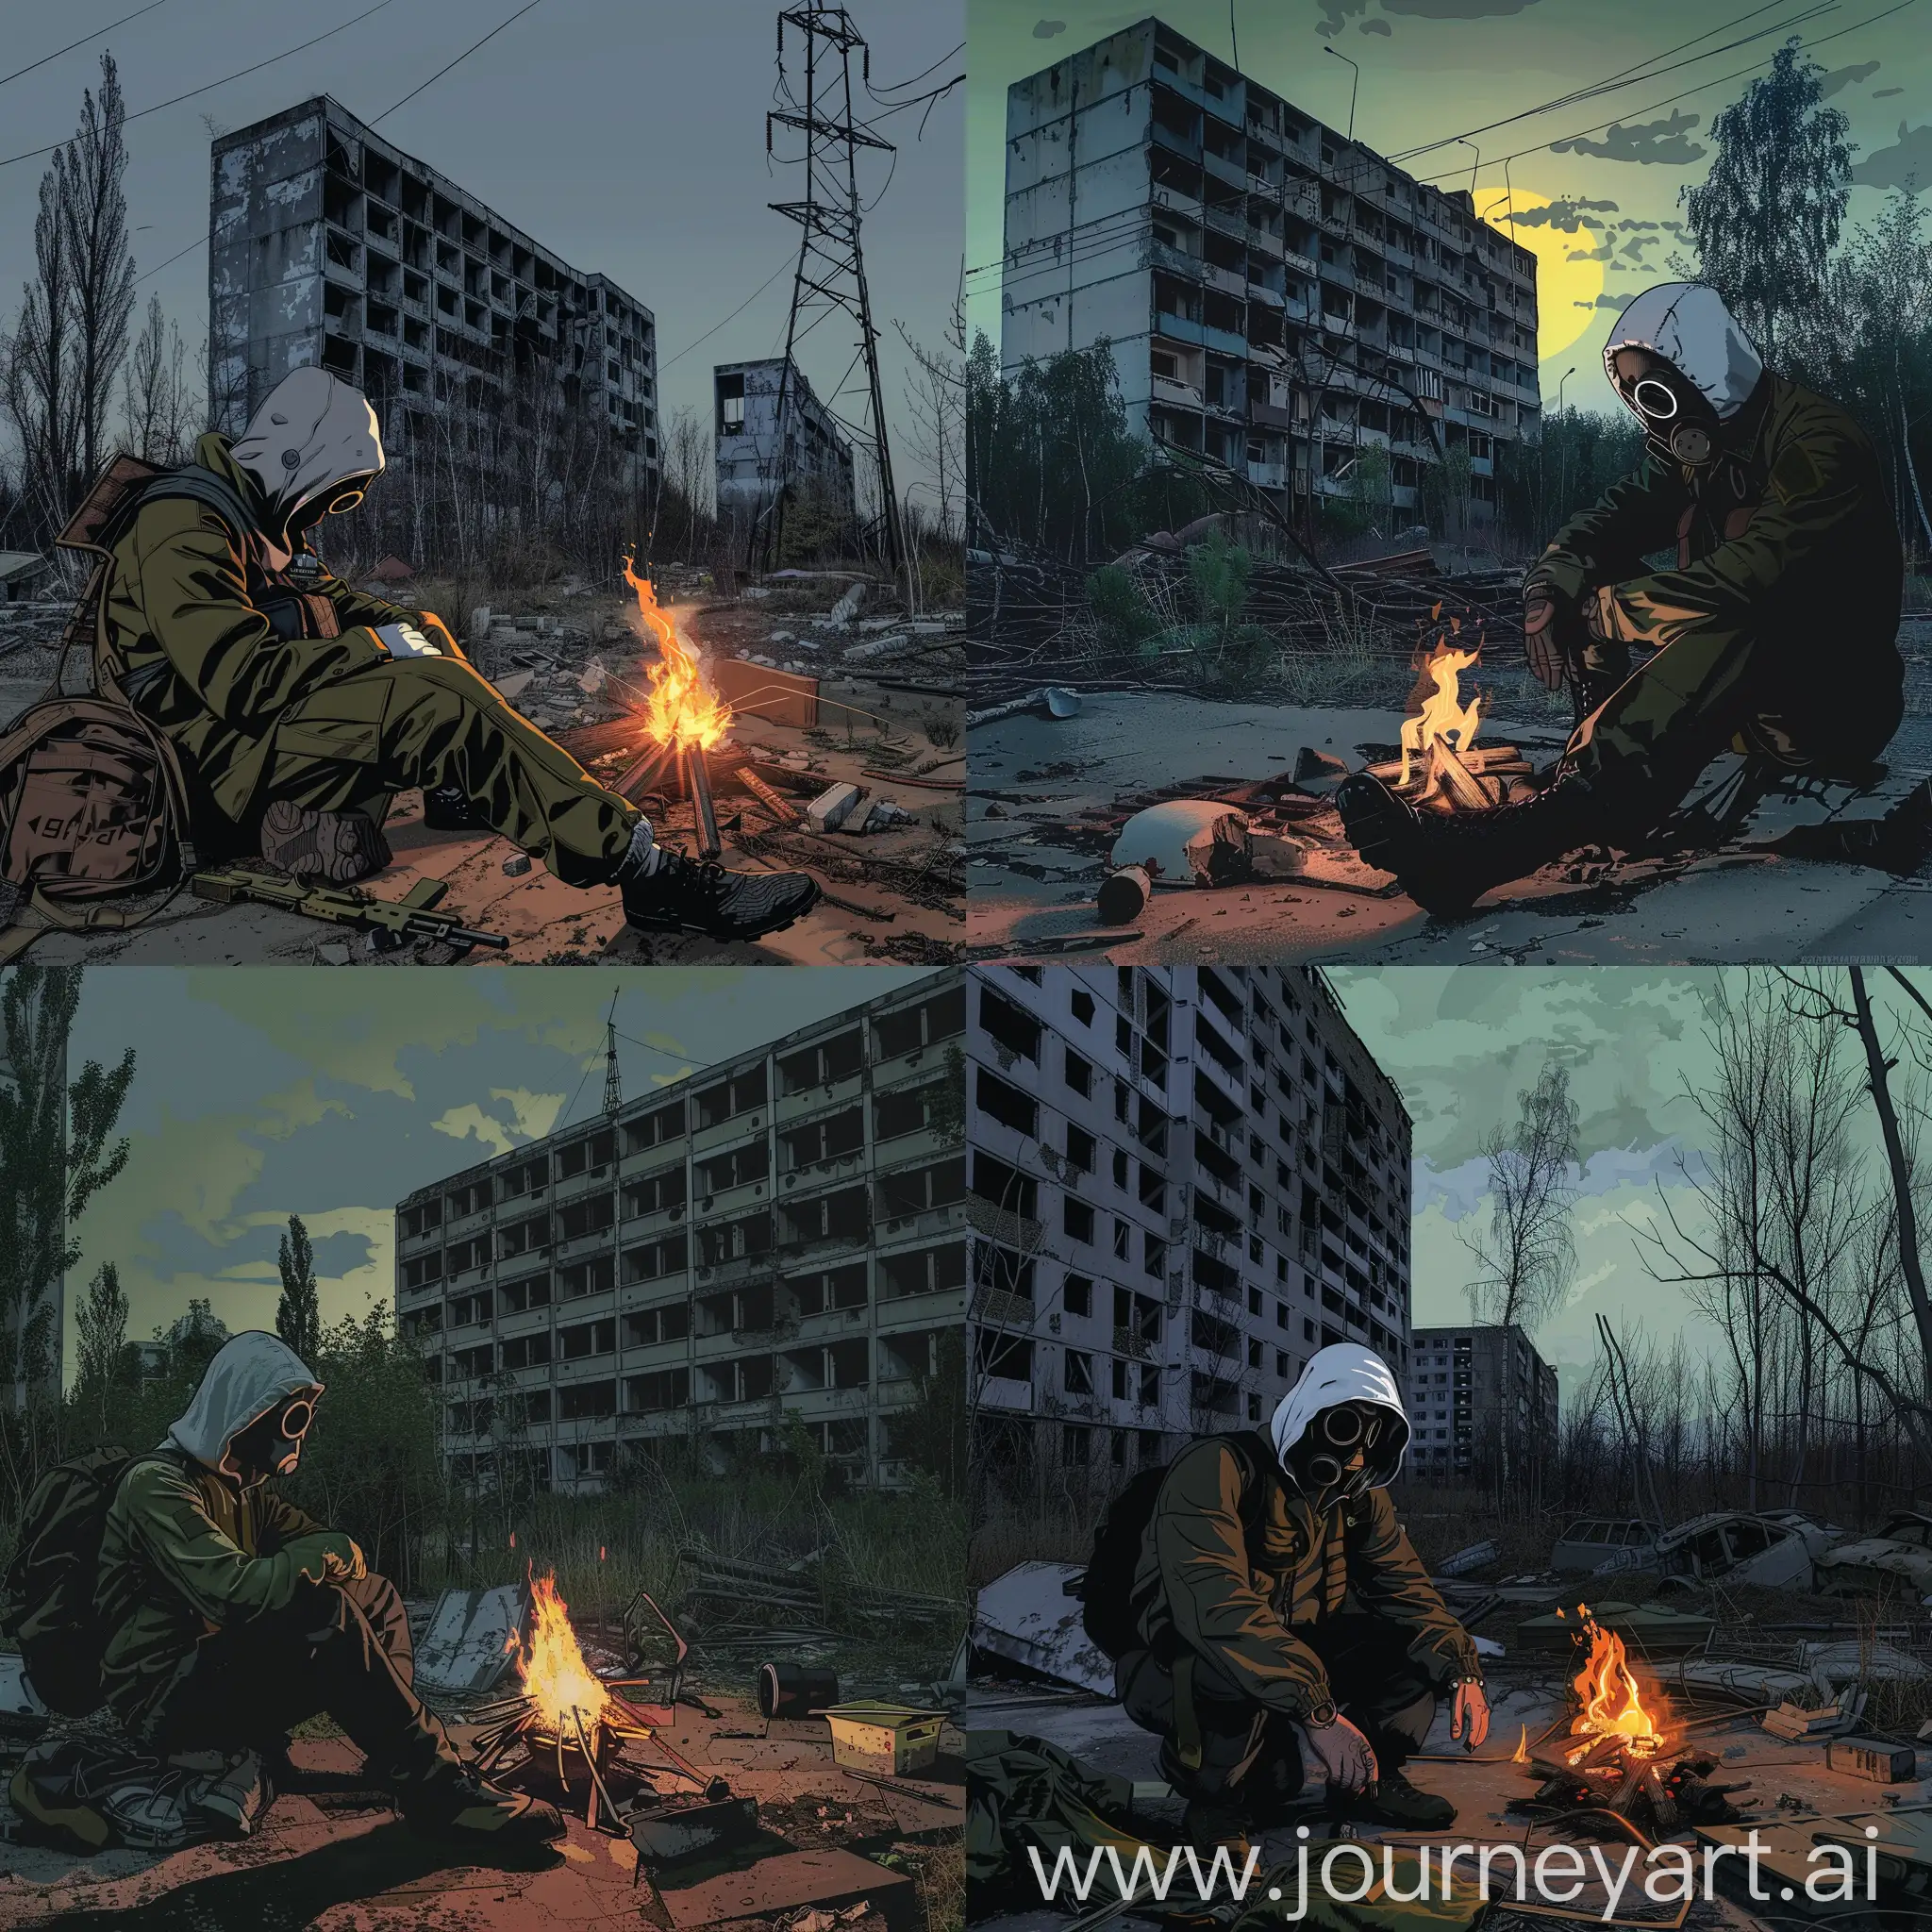 Stalker sitting by the campfire in abandoned Pripyat, comics style art.